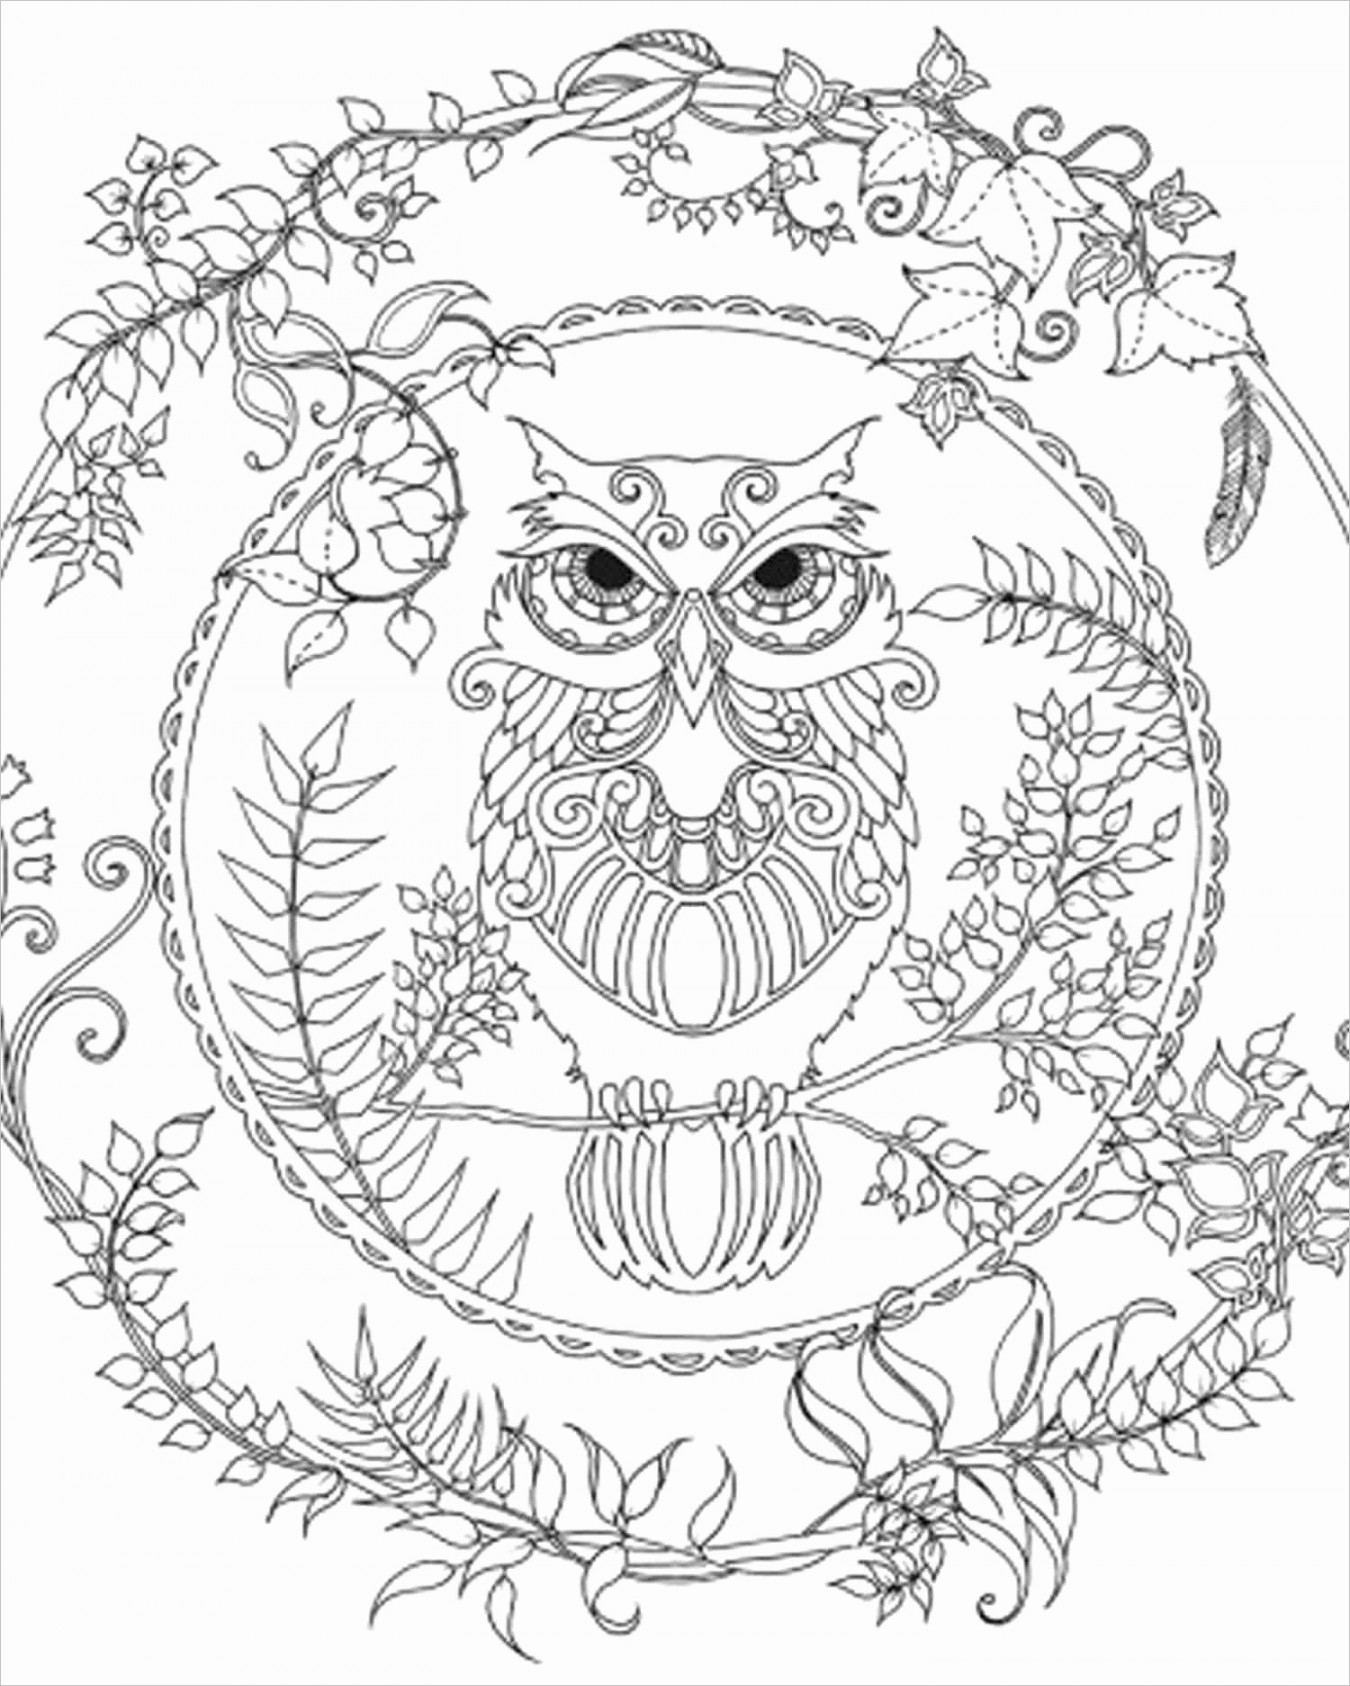 25+ Great Image of Intricate Coloring Pages - entitlementtrap.com